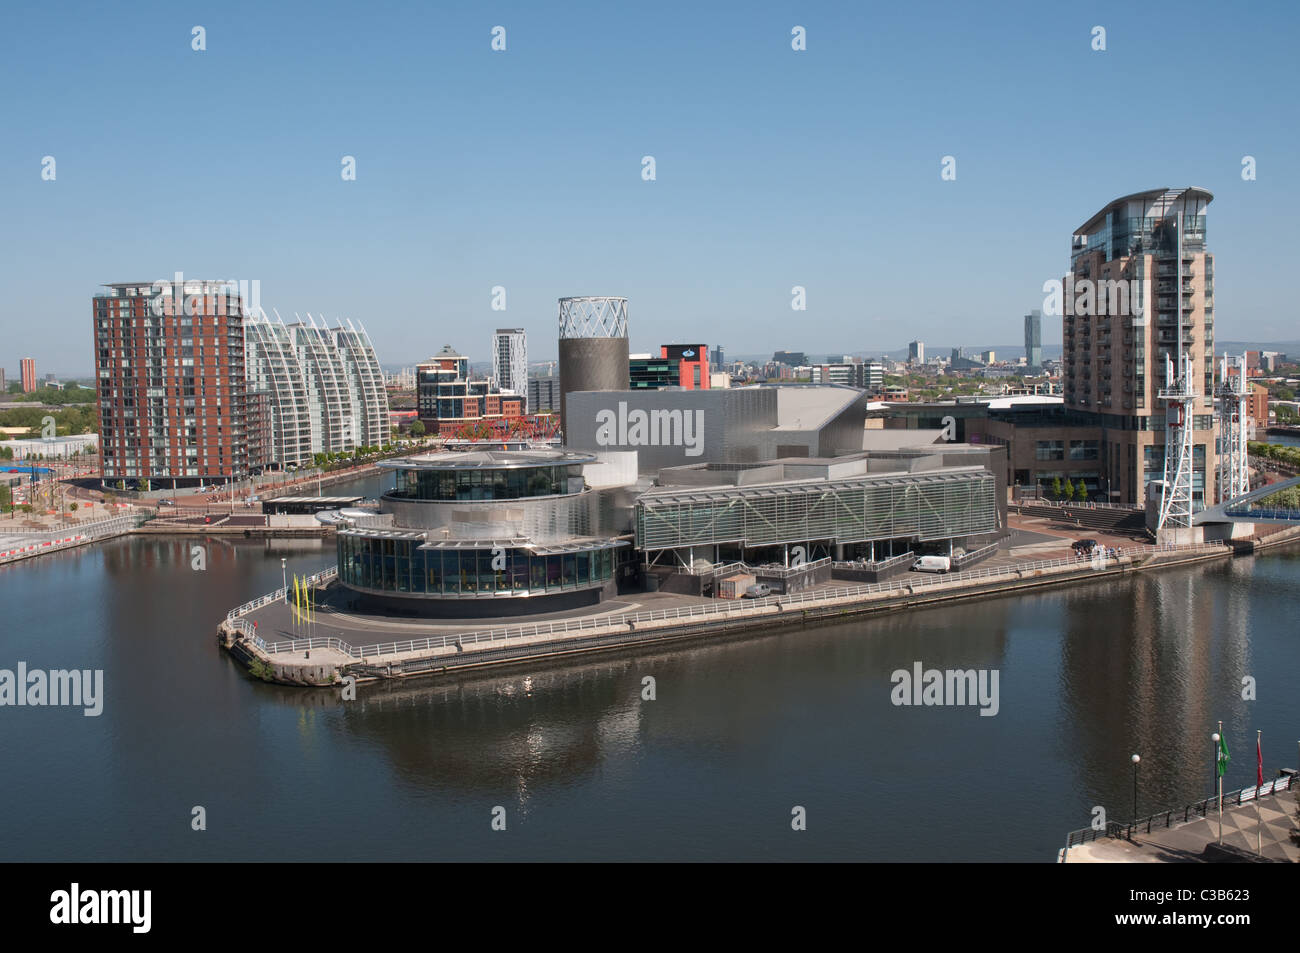 Il Lowry Salford Quays,Salford, Manchester, UK. Foto Stock